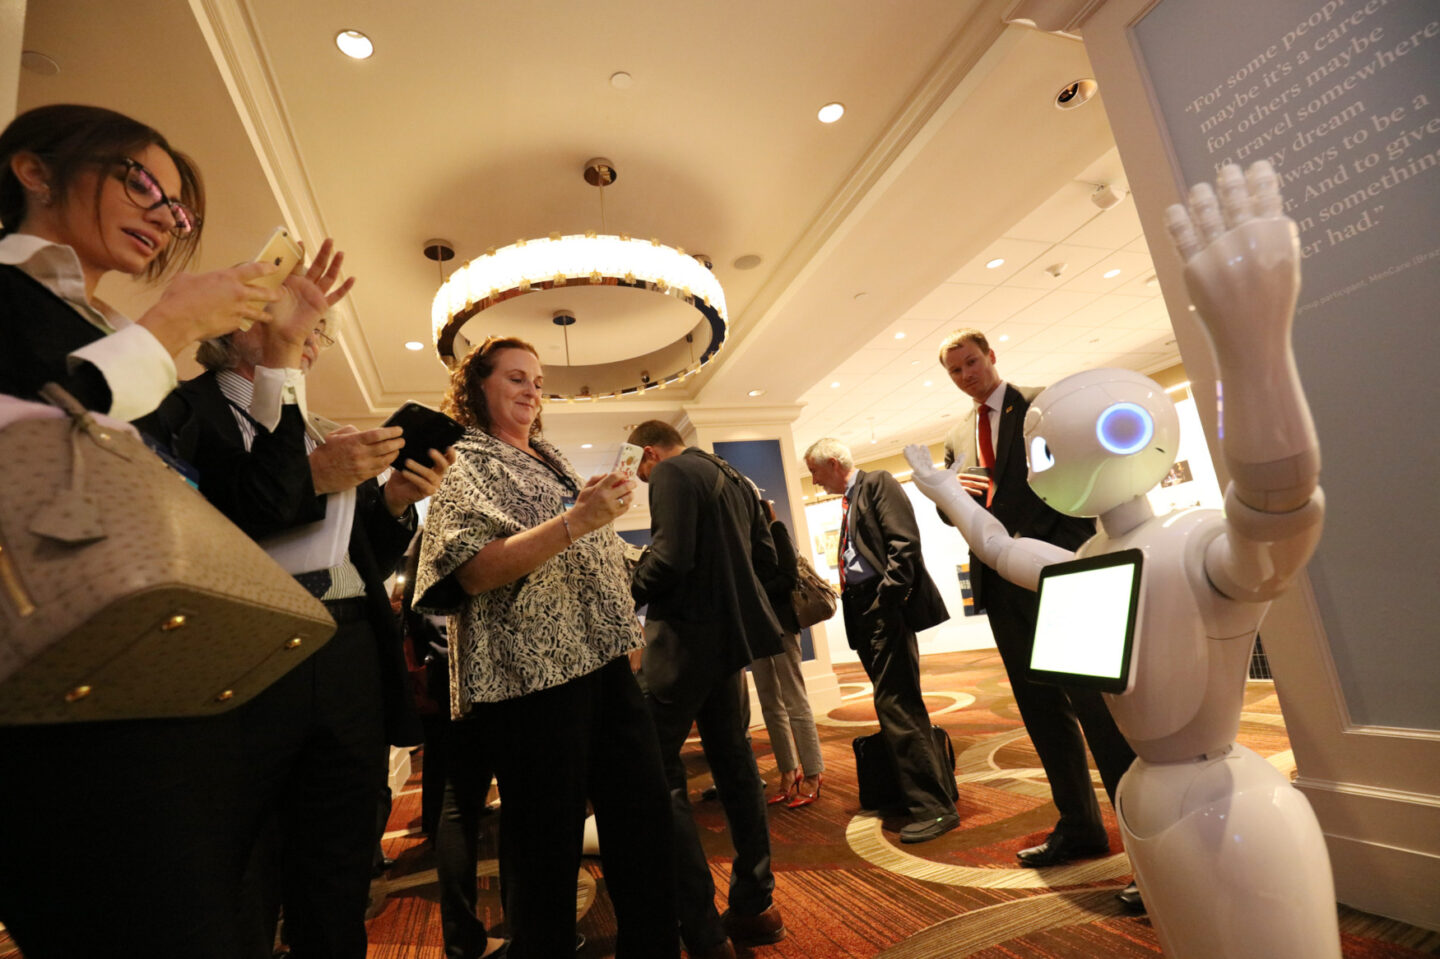 People interact with Pepper the Social Humanoid Robot